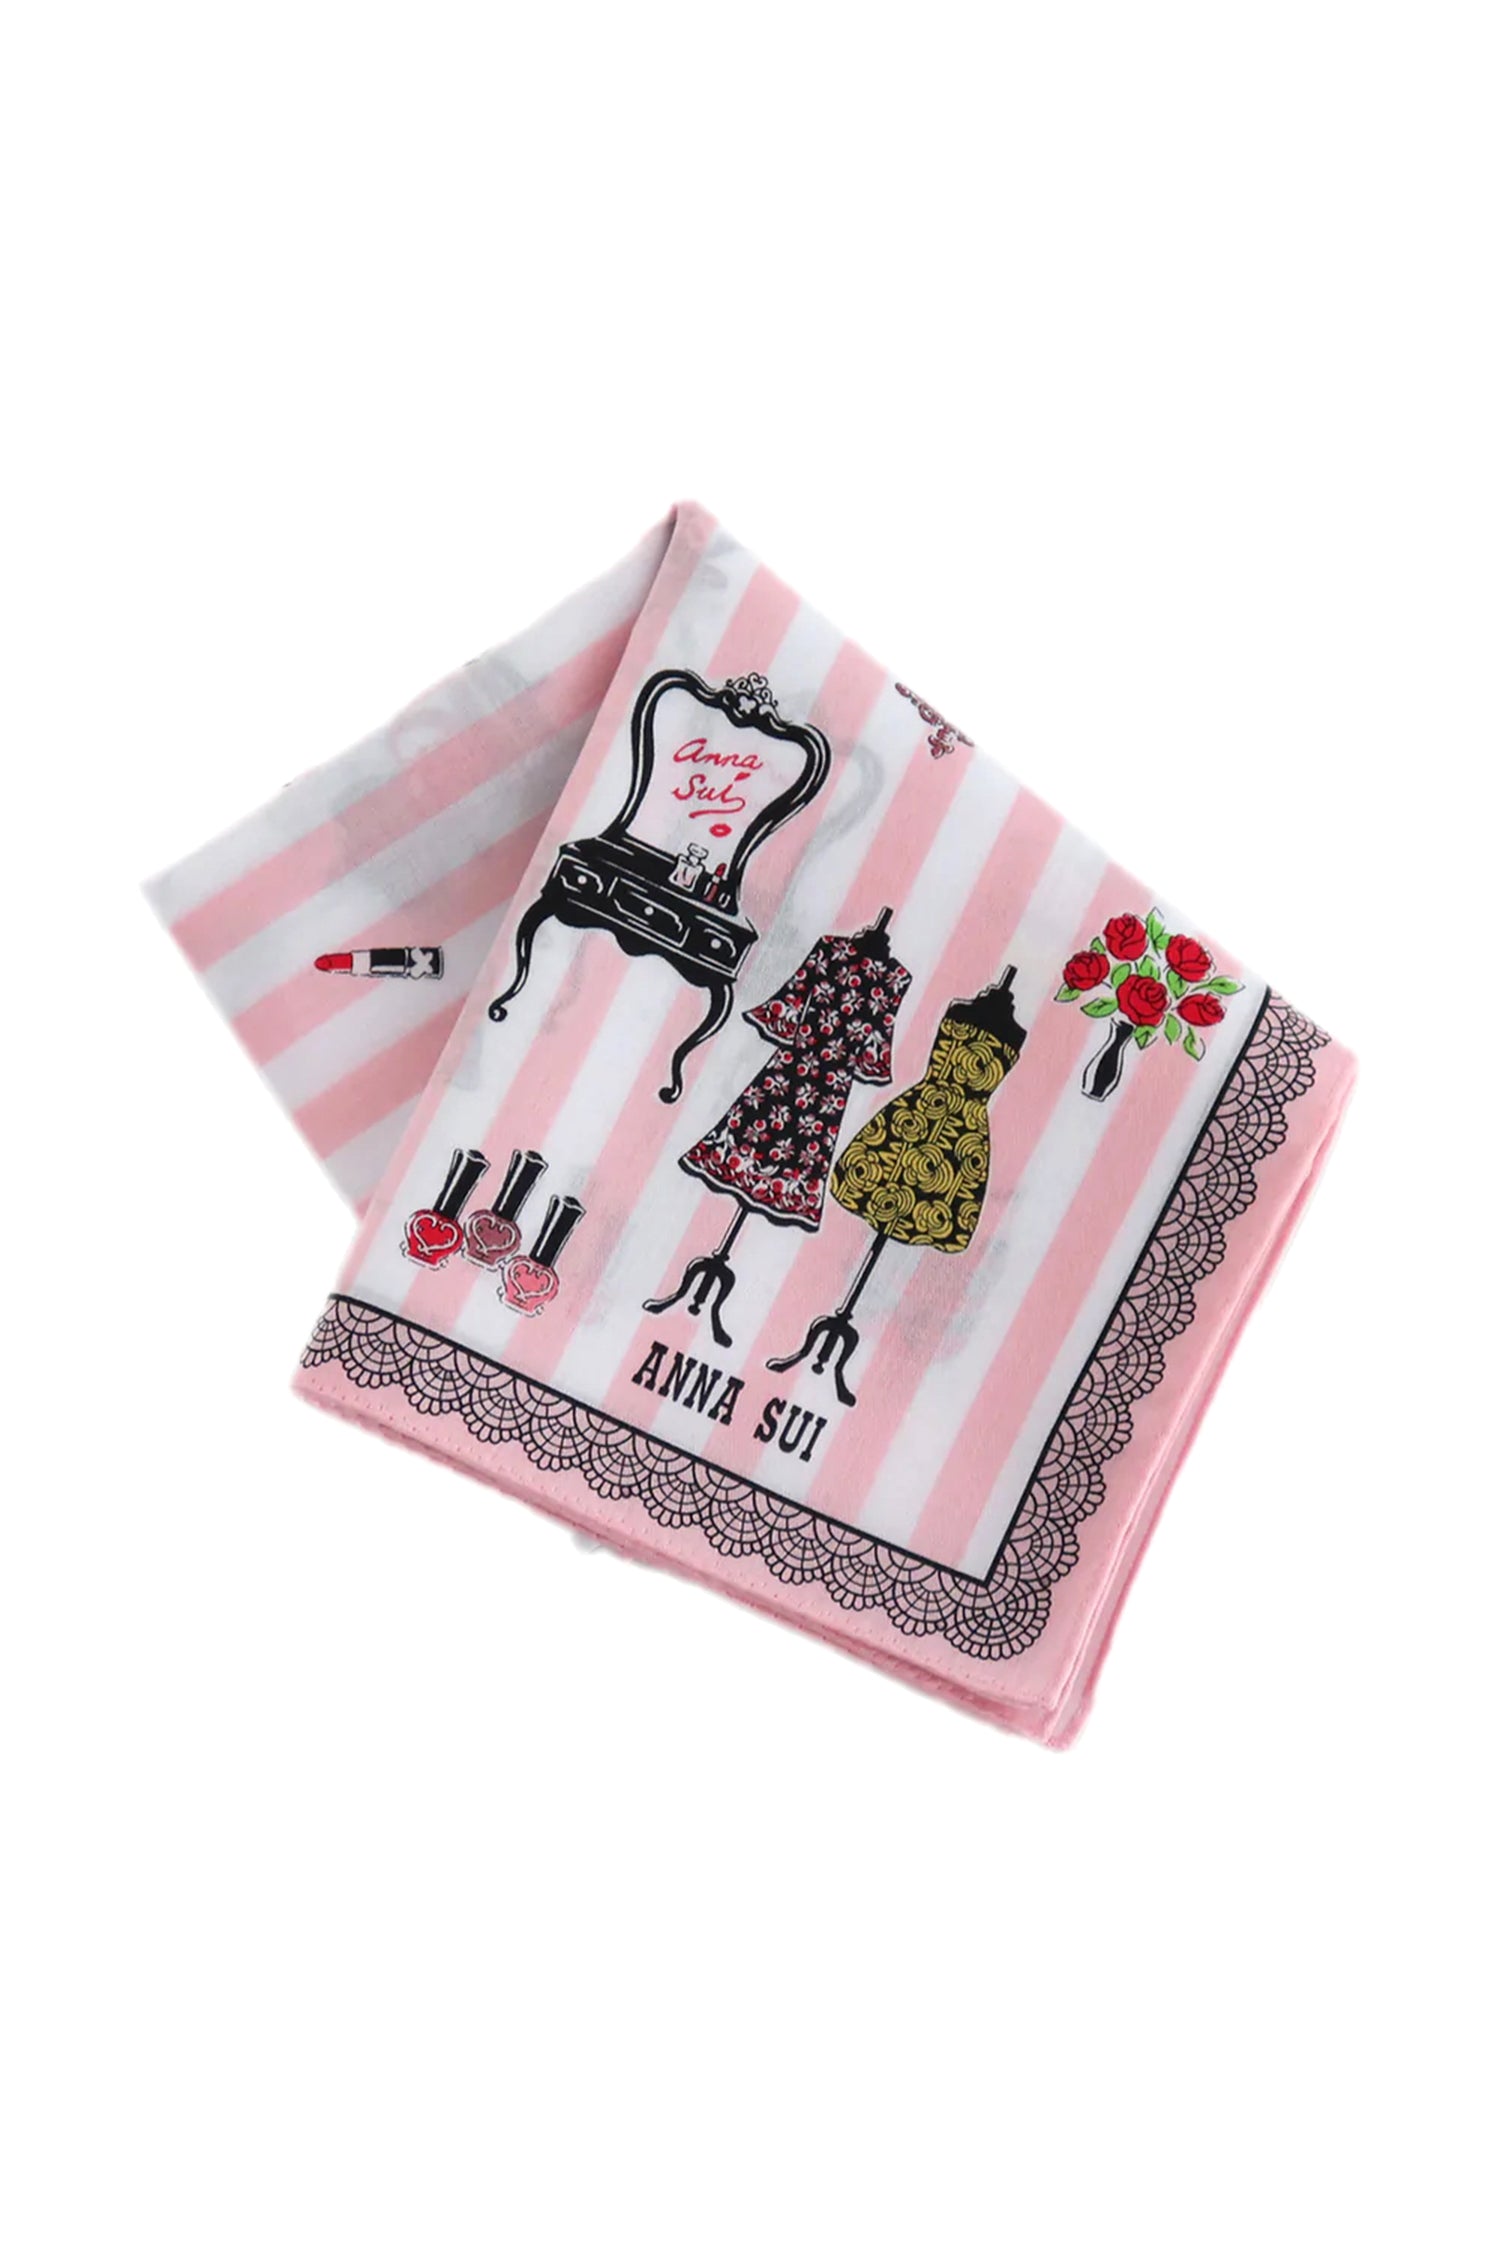 Squared Handkerchief, white/pink stripes, with stylized closet items, mirror, clothes, nails polish